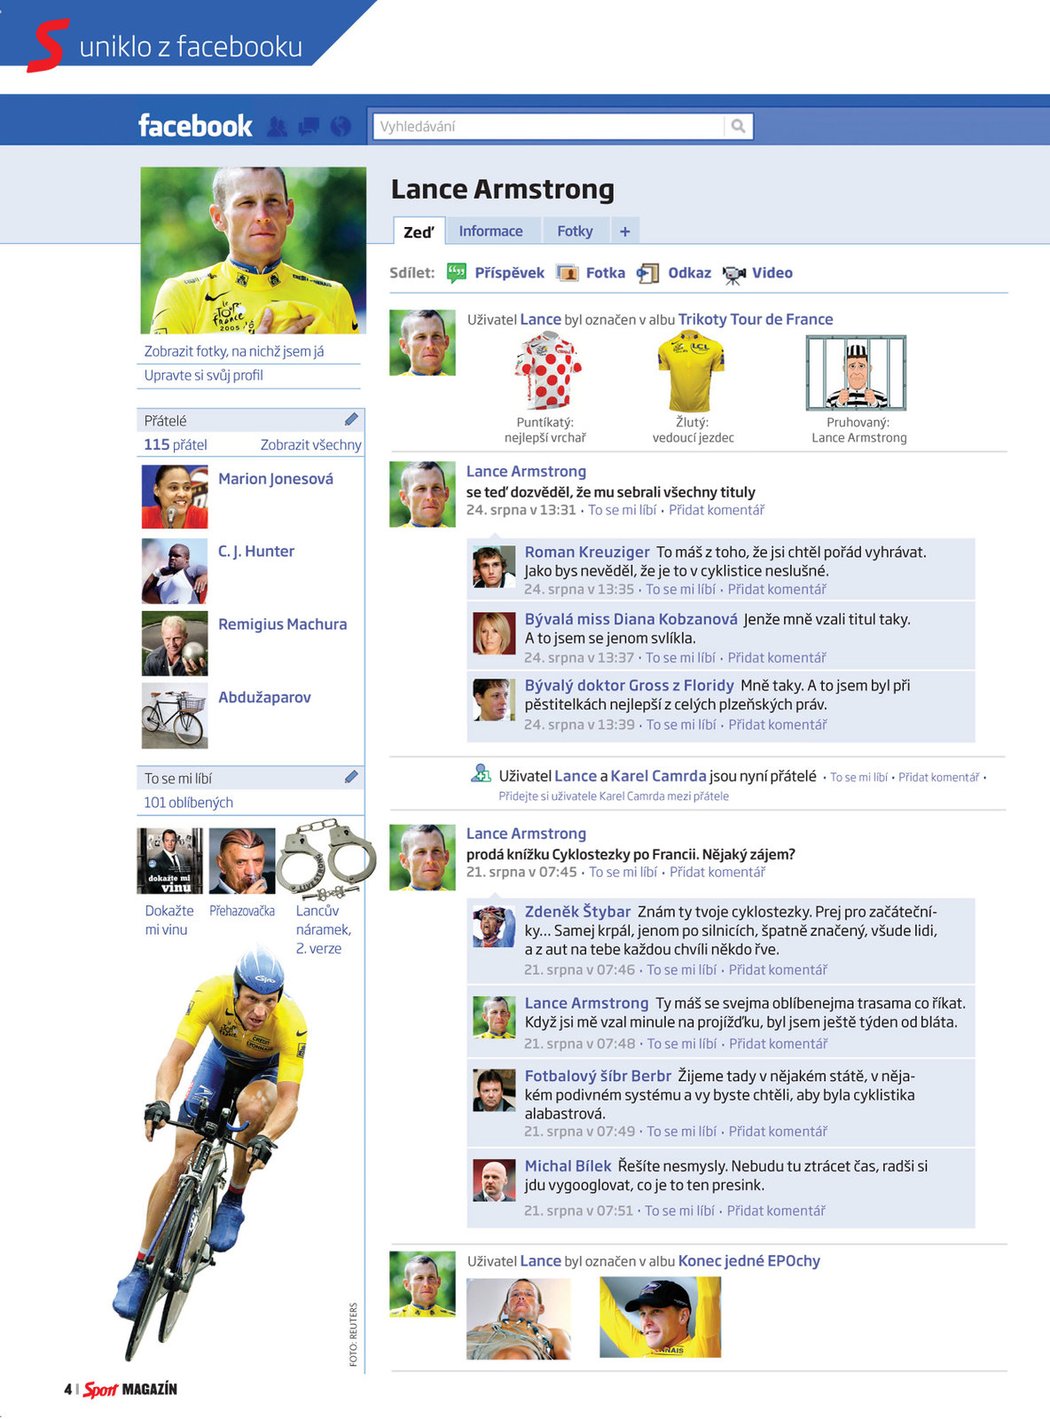 7.9.2012 | Lance Armstrong